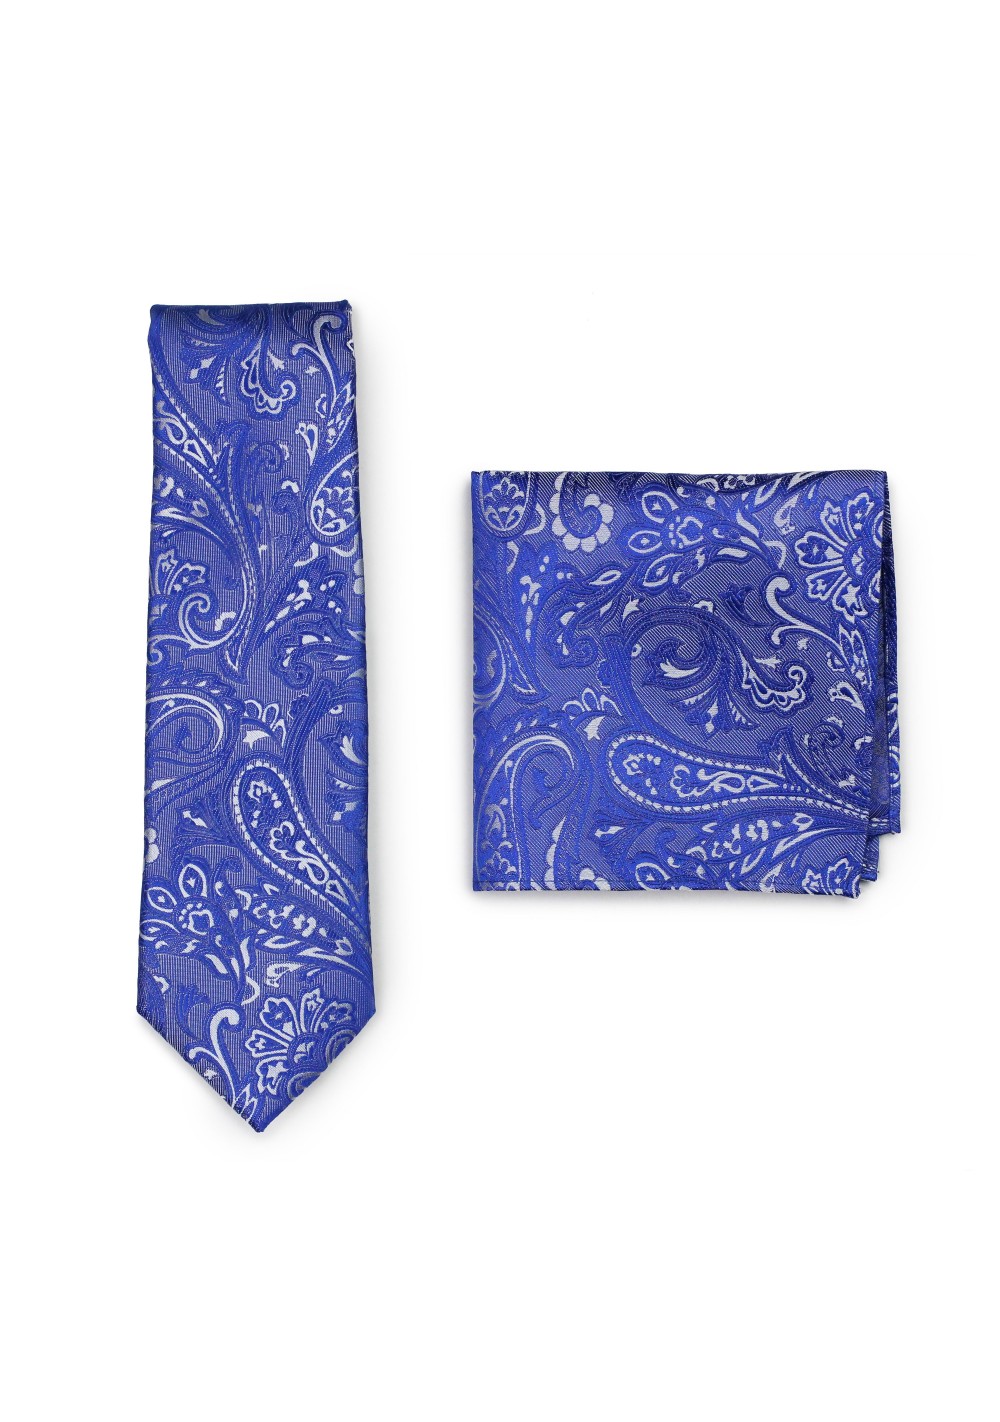 Formal Summer Paisley Tie in Morning Glory Blue with Pocket Square